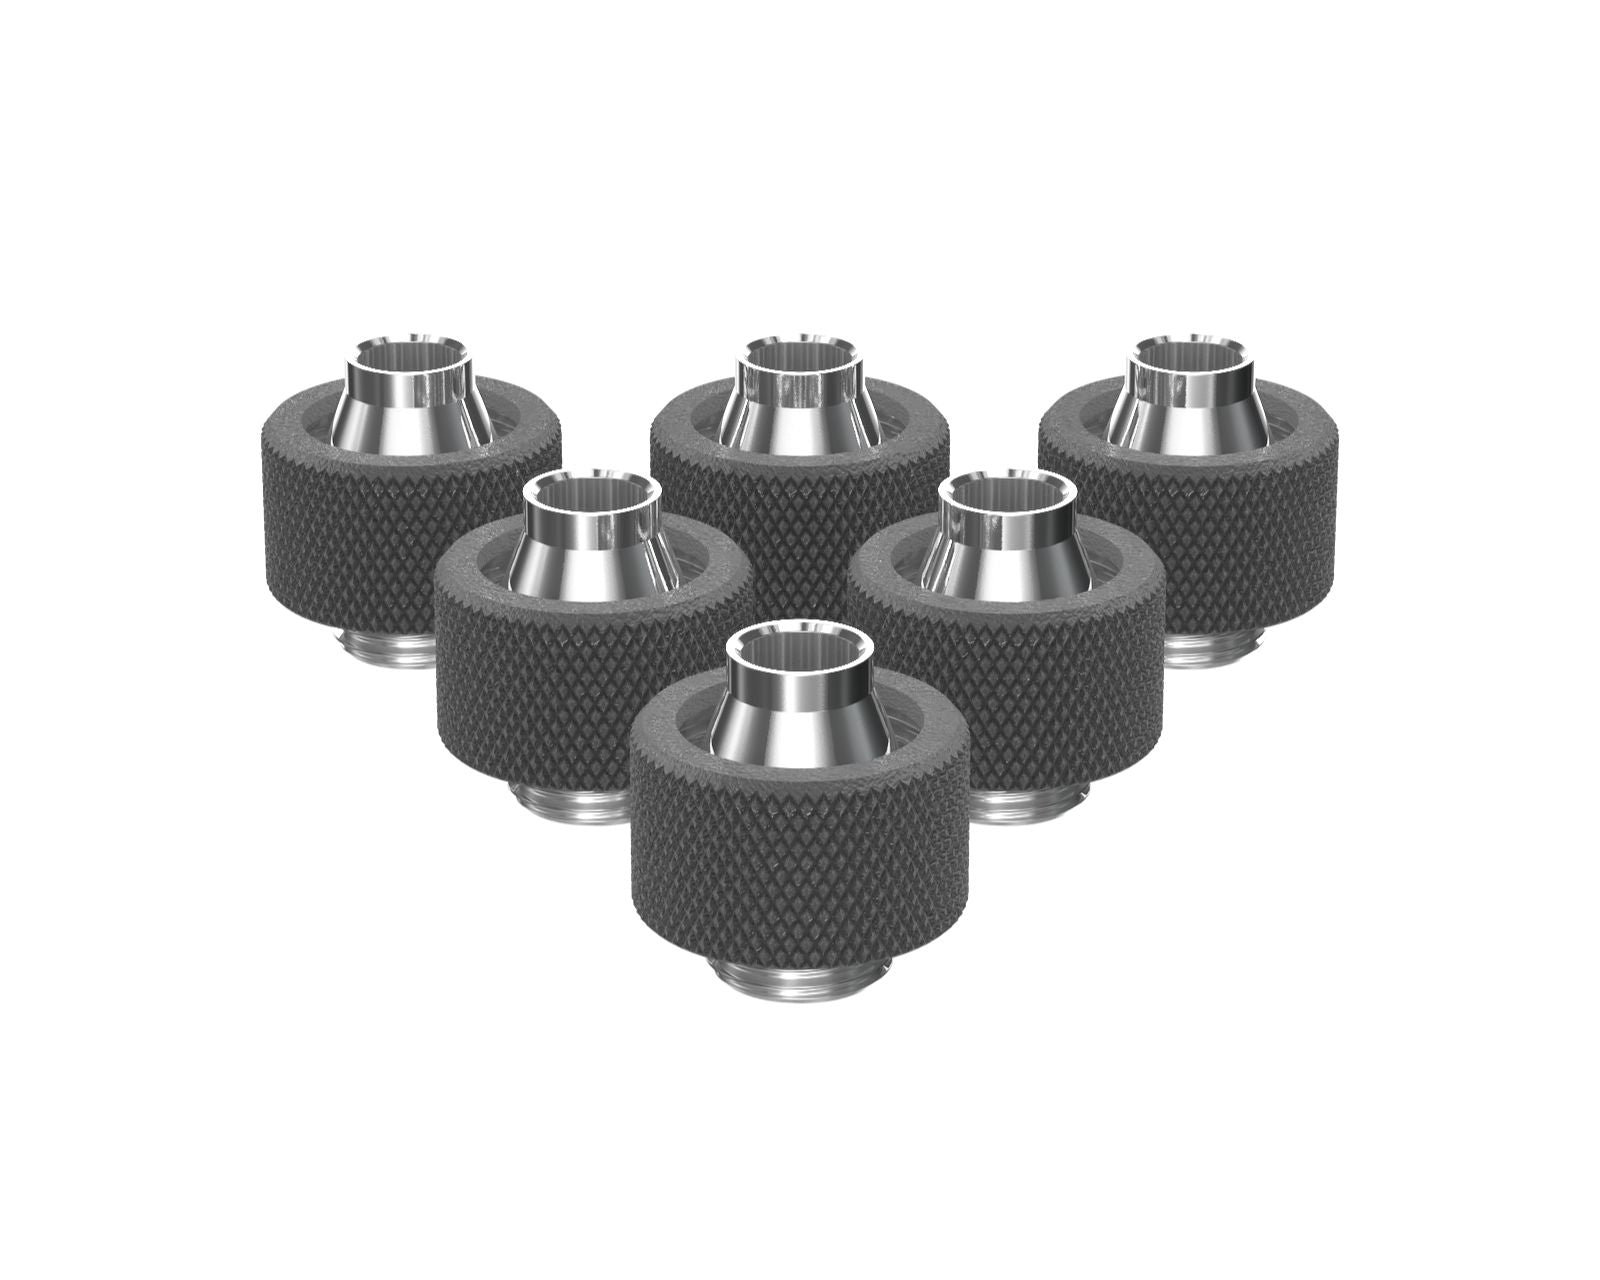 PrimoChill SecureFit SX - Premium Compression Fitting For 3/8in ID x 5/8in OD Flexible Tubing 6 Pack (F-SFSX58-6) - Available in 20+ Colors, Custom Watercooling Loop Ready - TX Matte Gun Metal